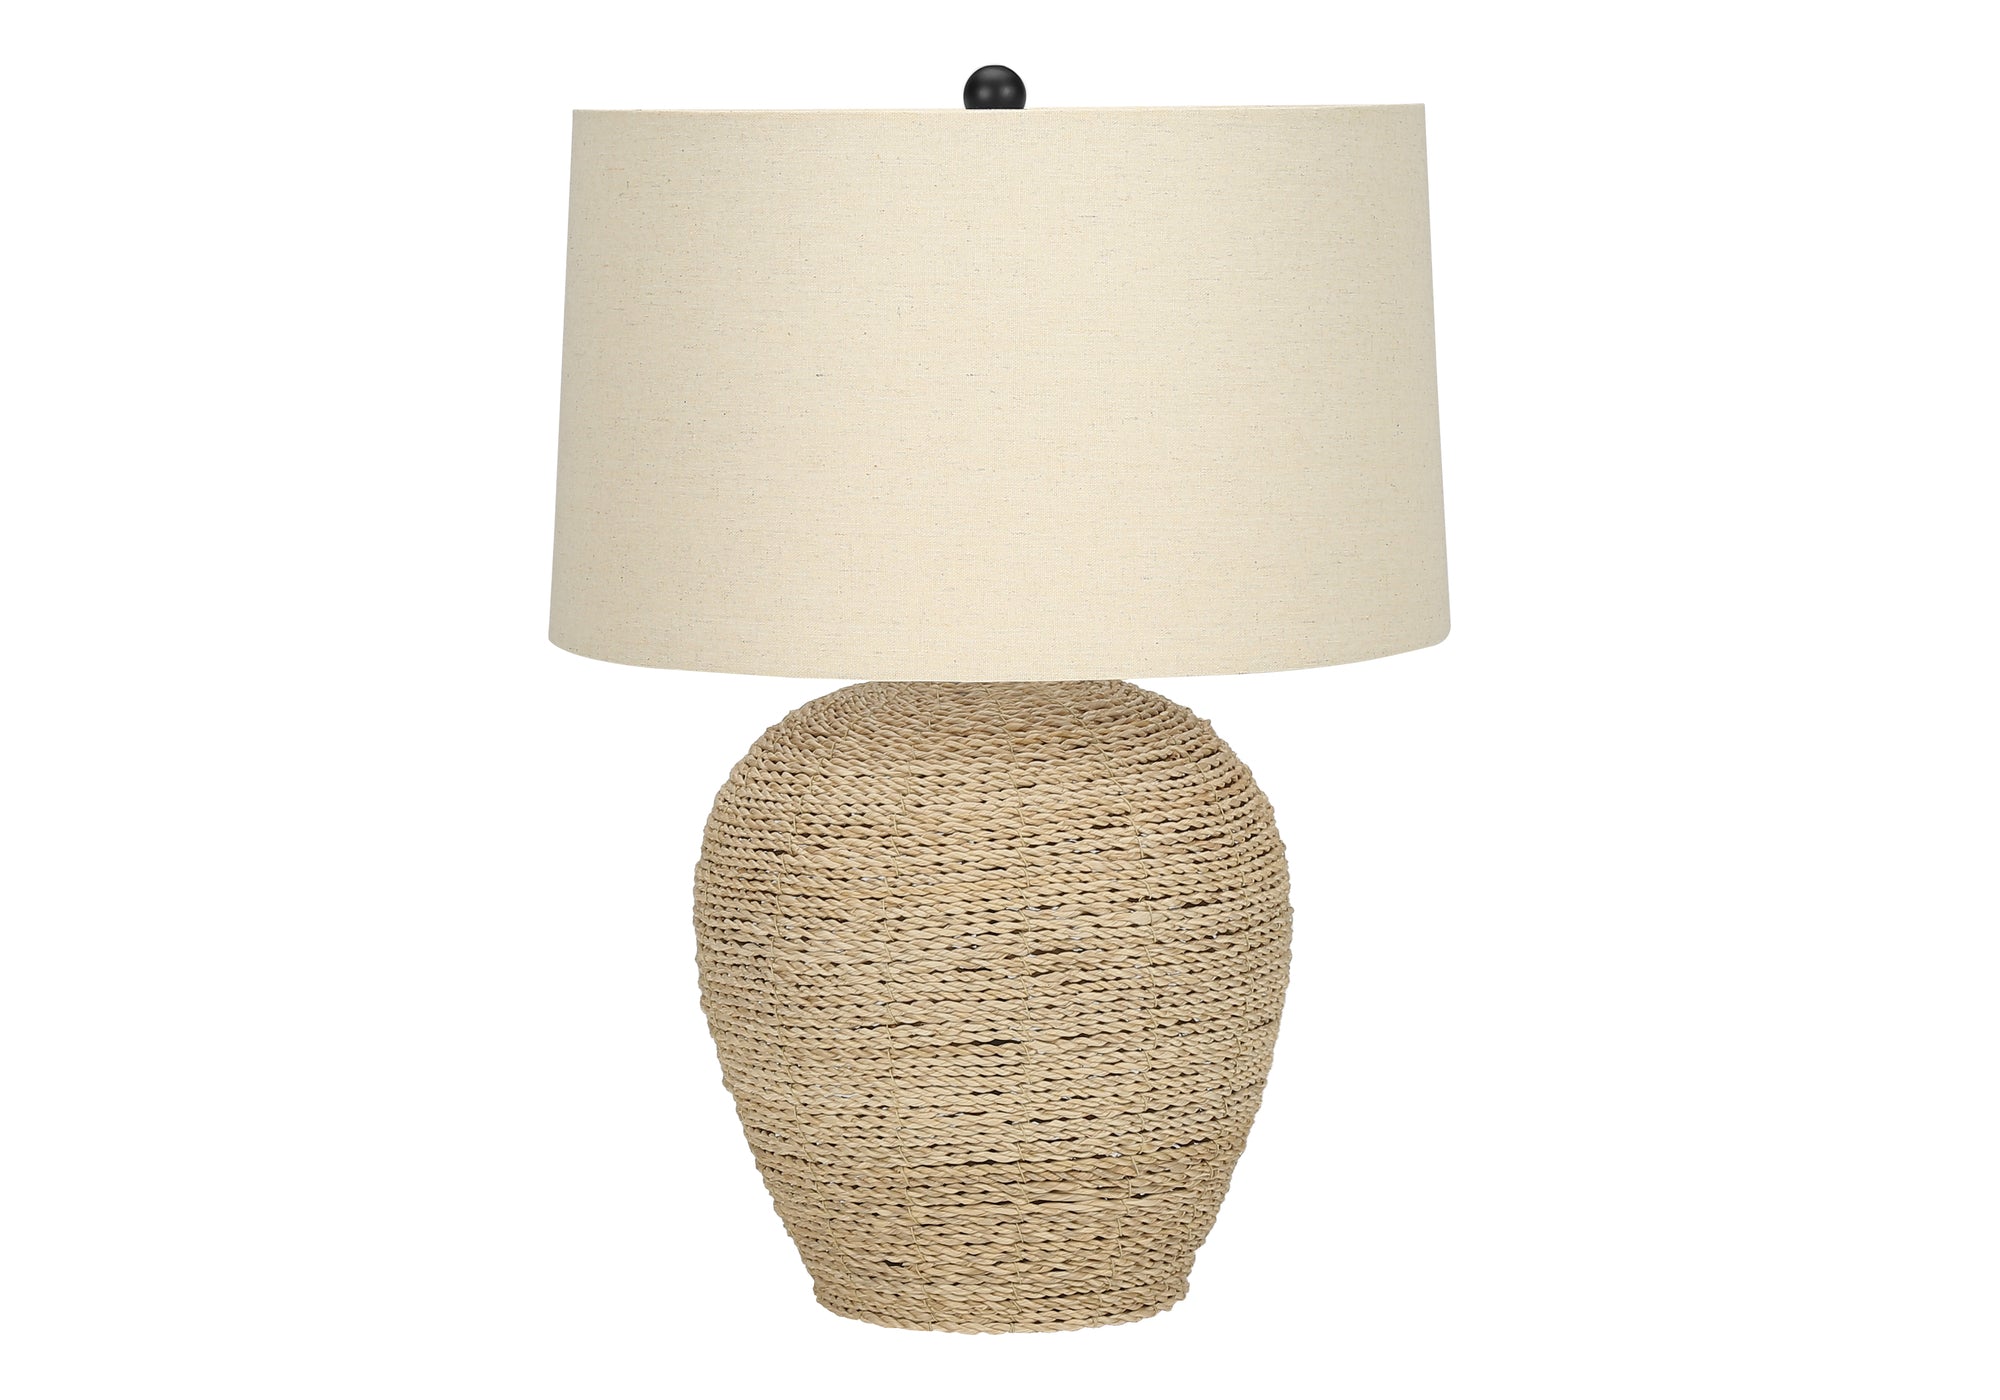 MN-479713    Lighting, 25"H, Table Lamp, Rattan, Beige Shade, Transitional